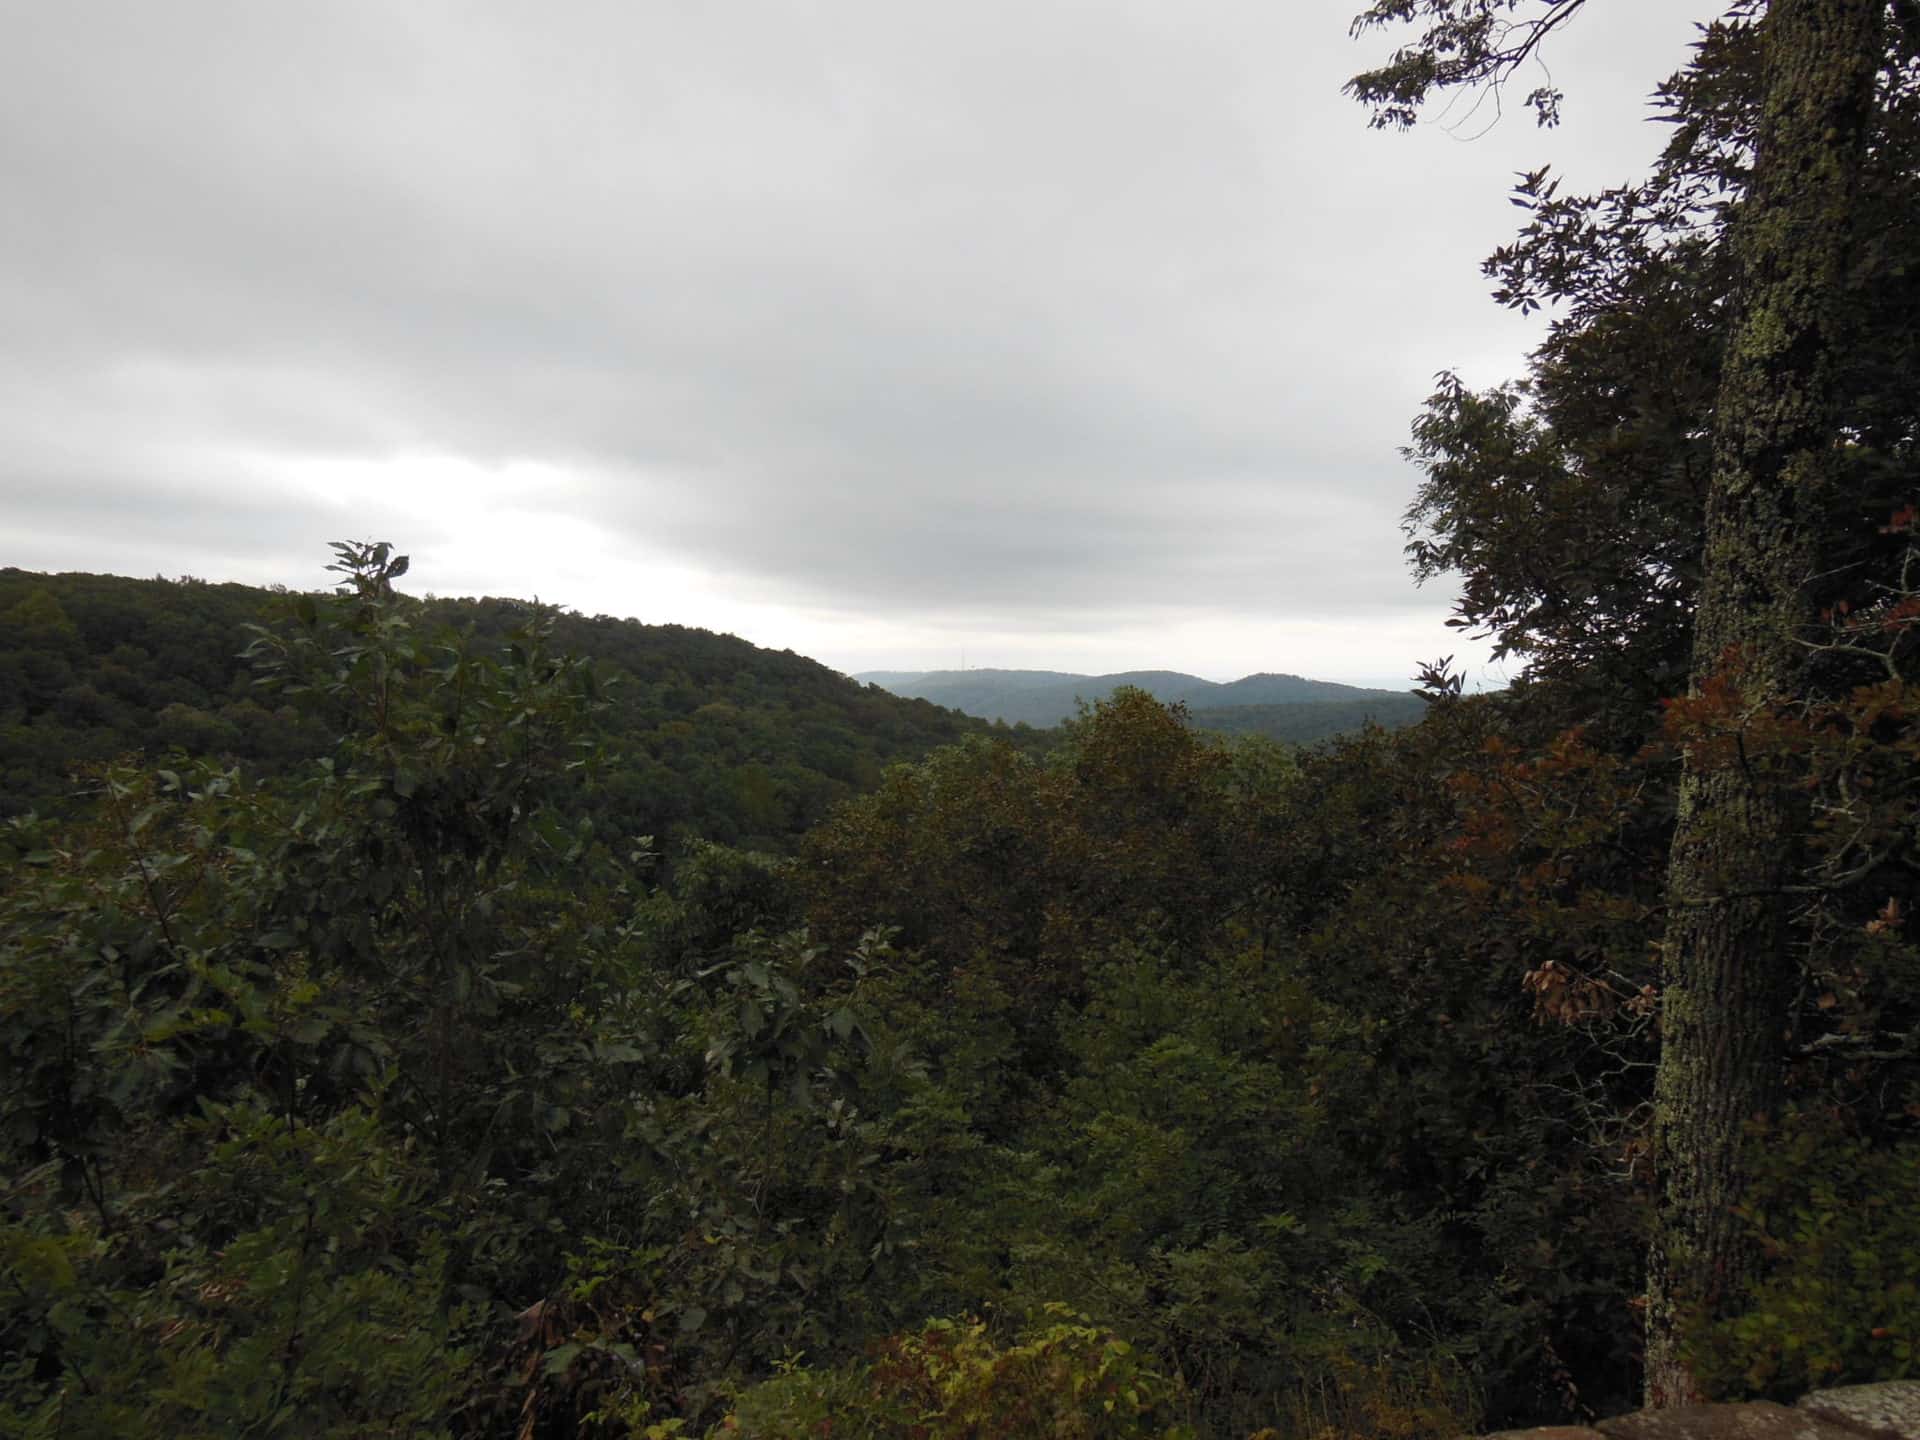 Monte Sano State Park - Lodge View of the Hills